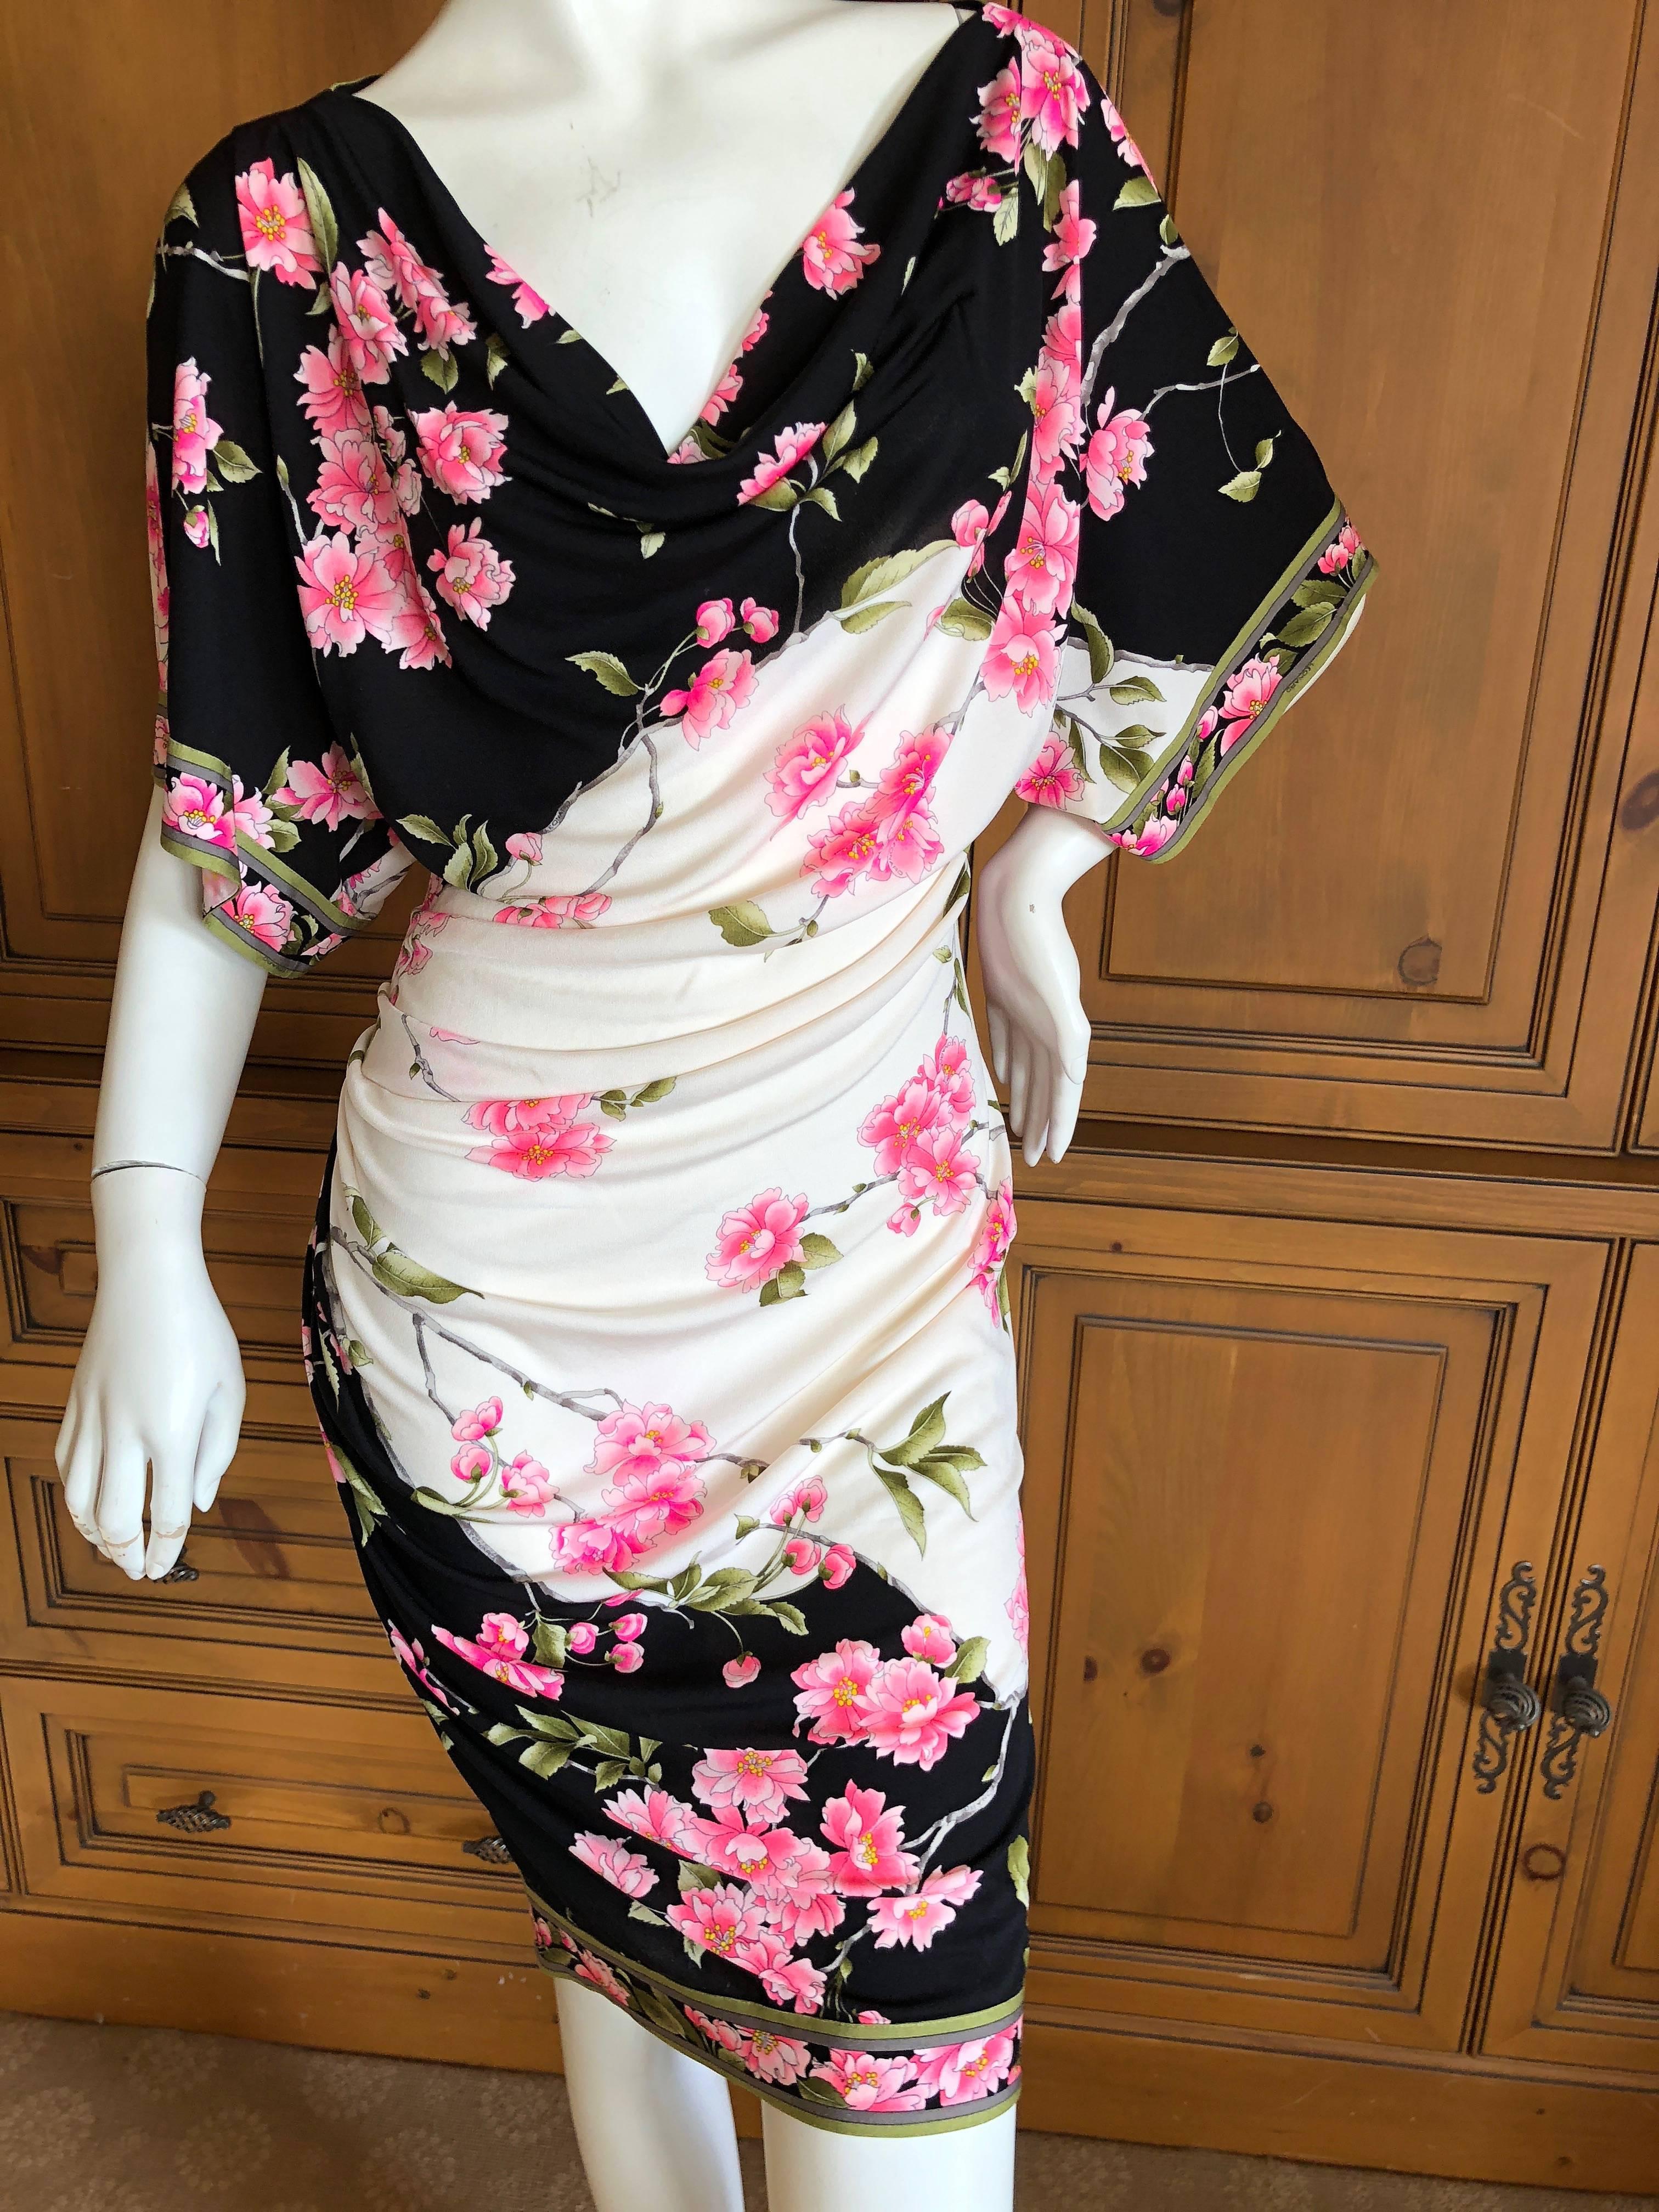 Leonard Paris Luscious Silk Jersey Floral Print Dress New with Tags In Excellent Condition For Sale In Cloverdale, CA